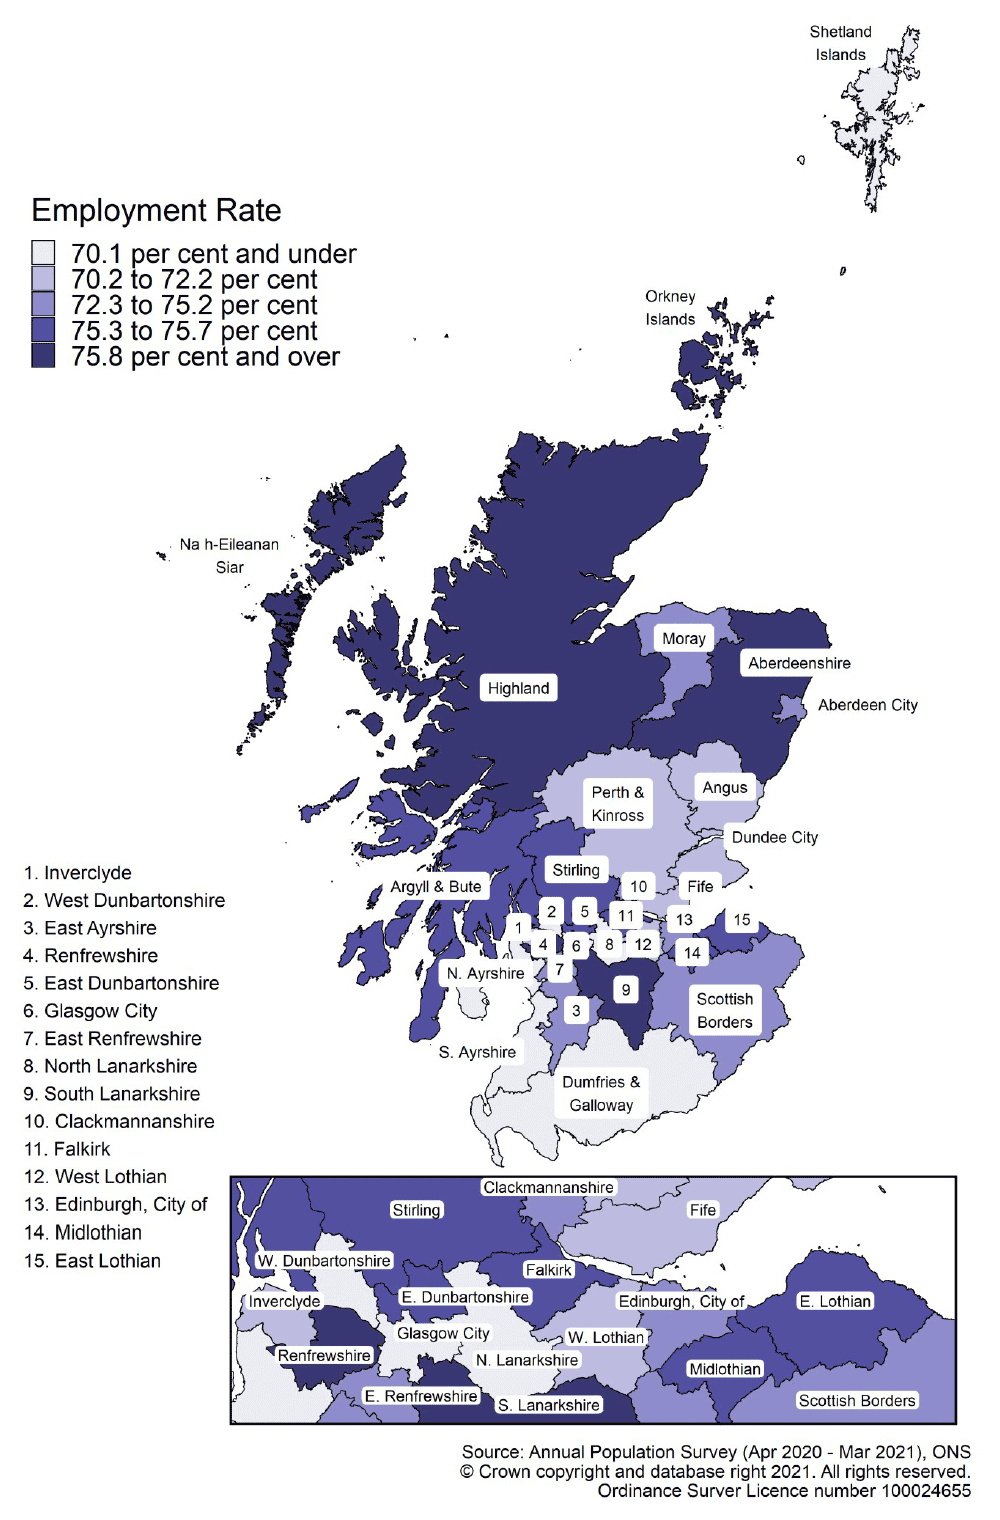 Map of Scotland showing employment rate ranges by local authority area for ages 16 to 64 in April 2020-March 2021